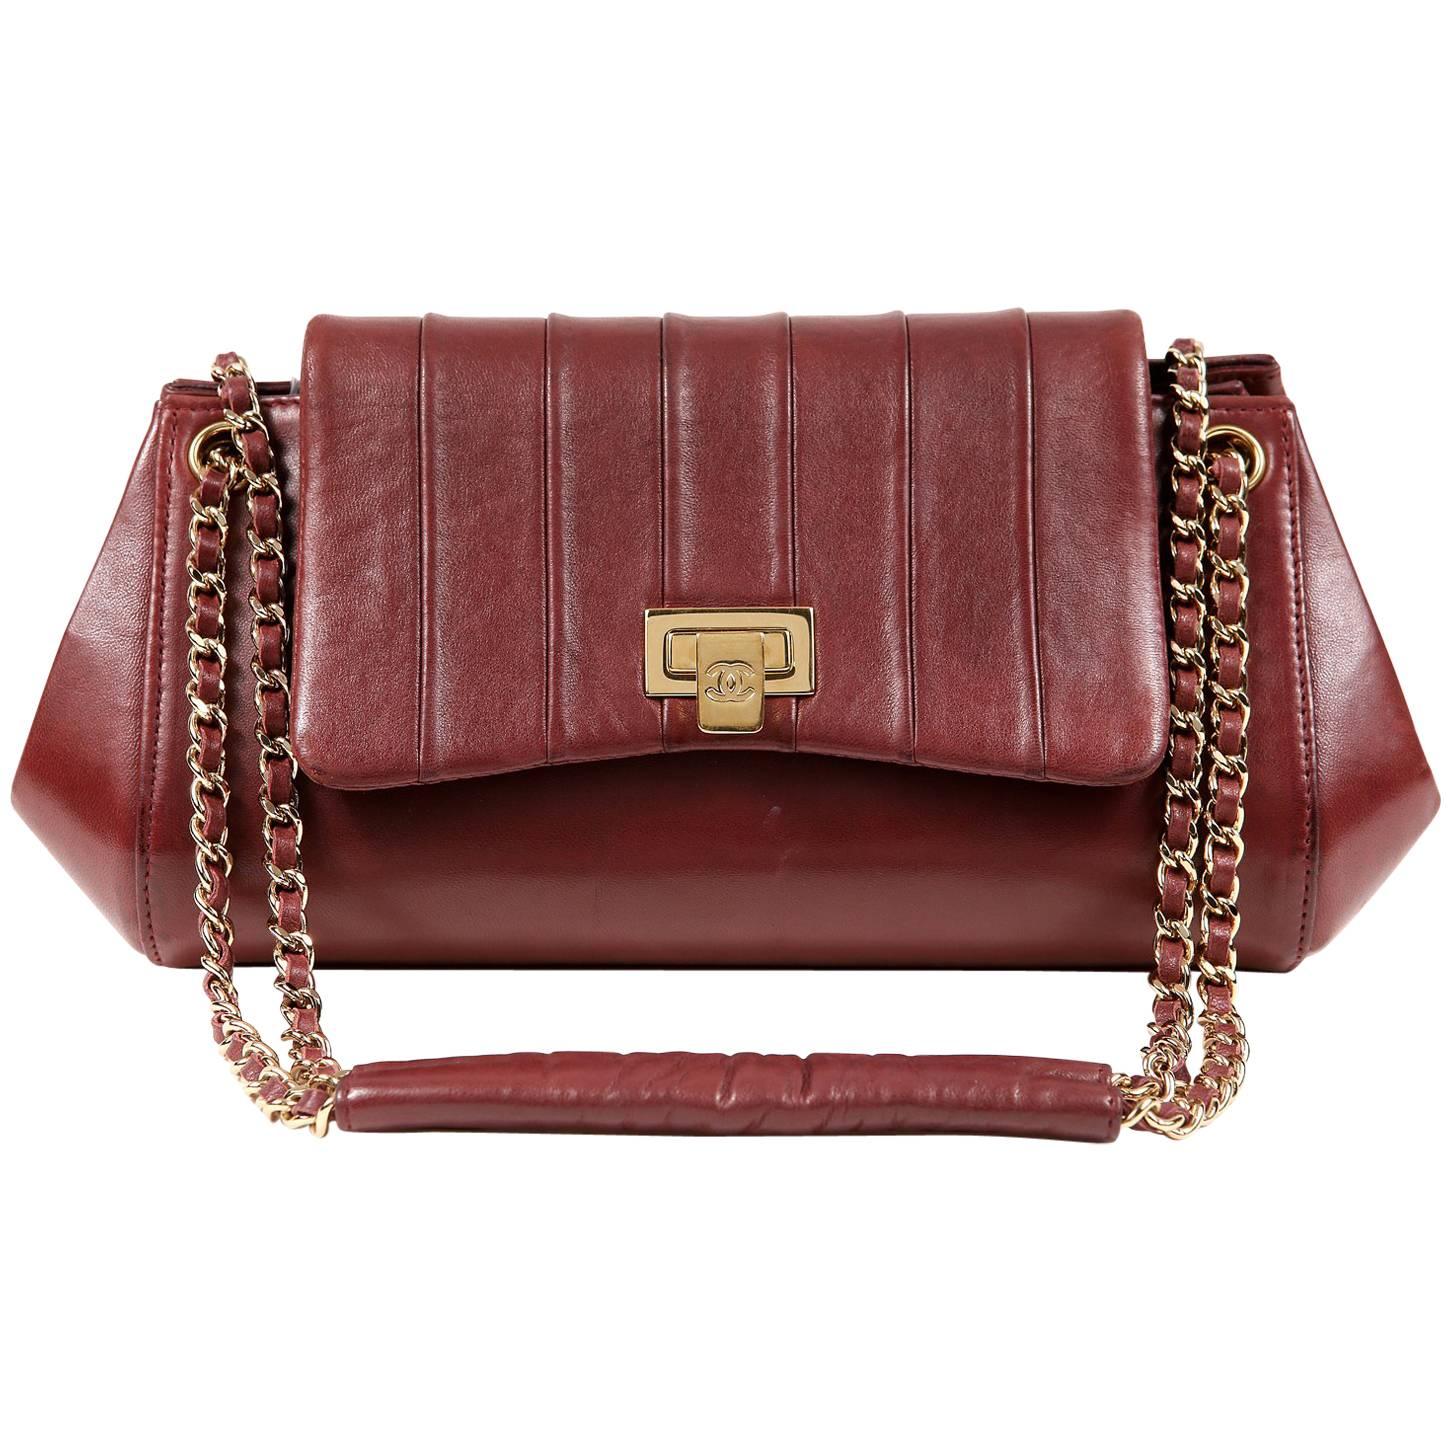 Chanel Burgundy Leather  Accordion Flap Bag For Sale